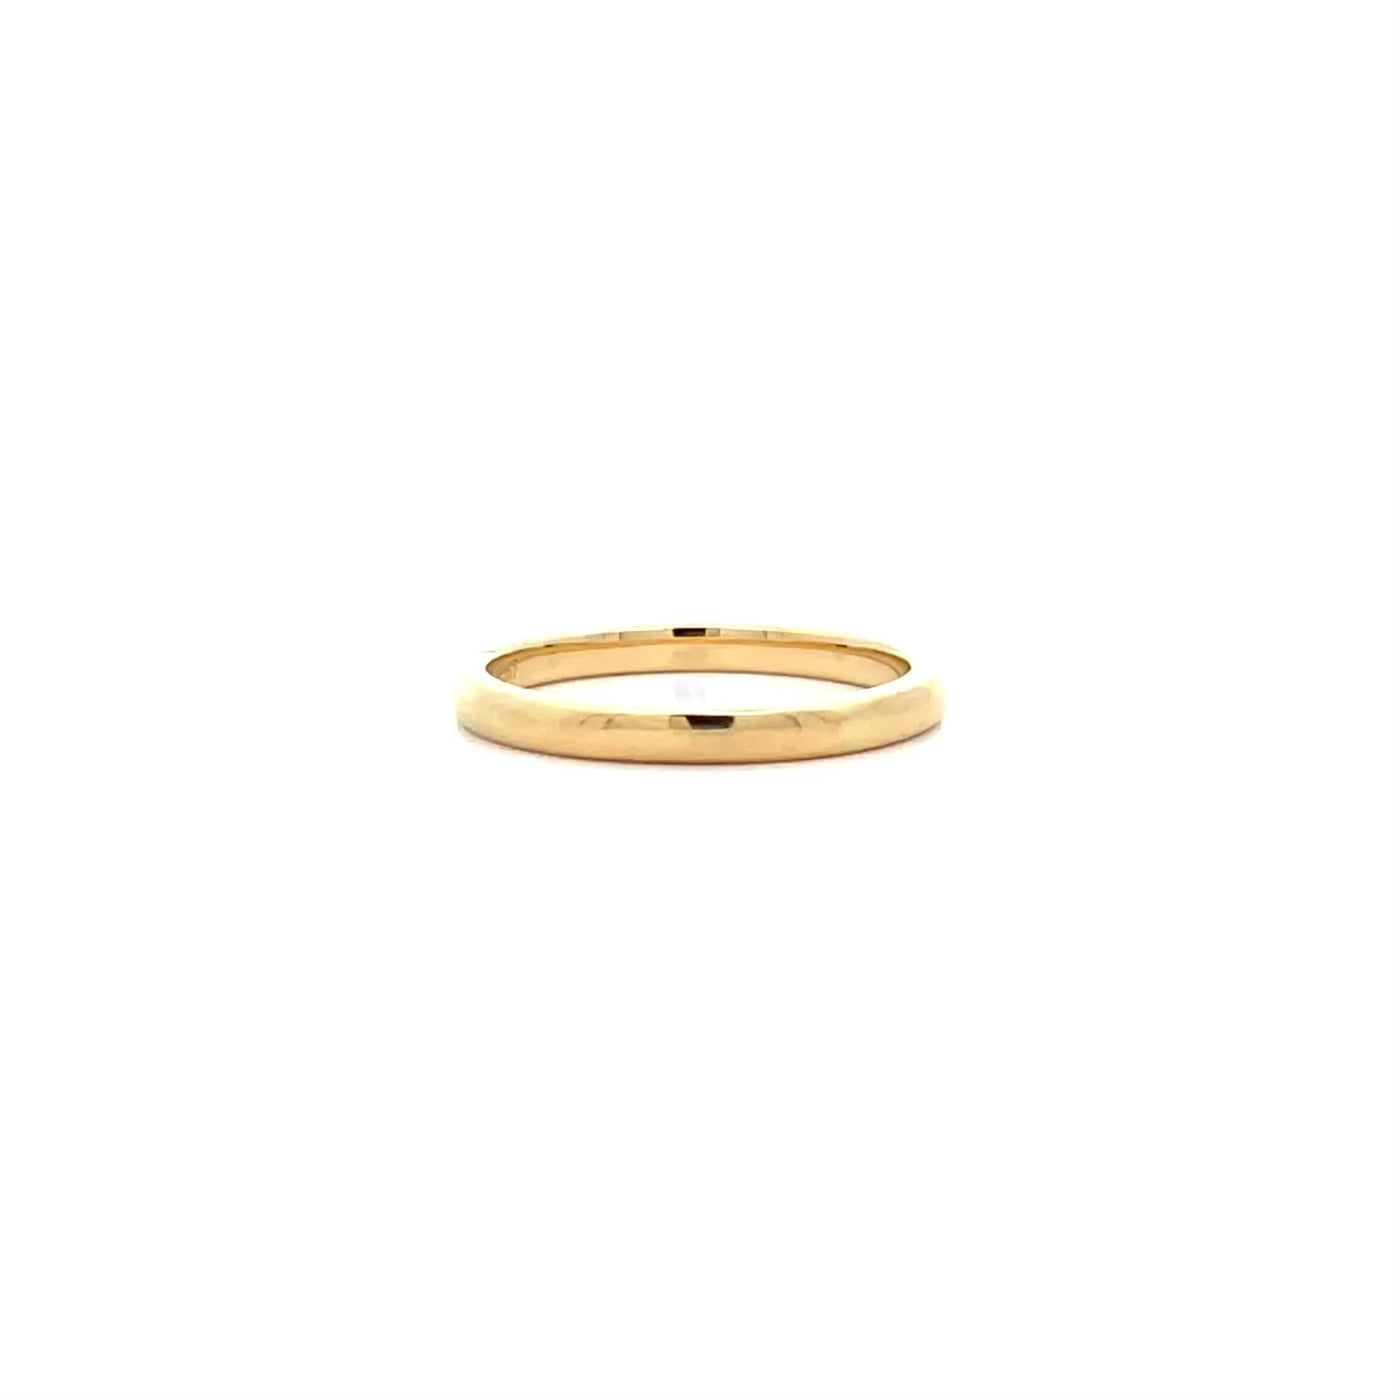 Half Round Ring in Yellow Gold | 2.7mm